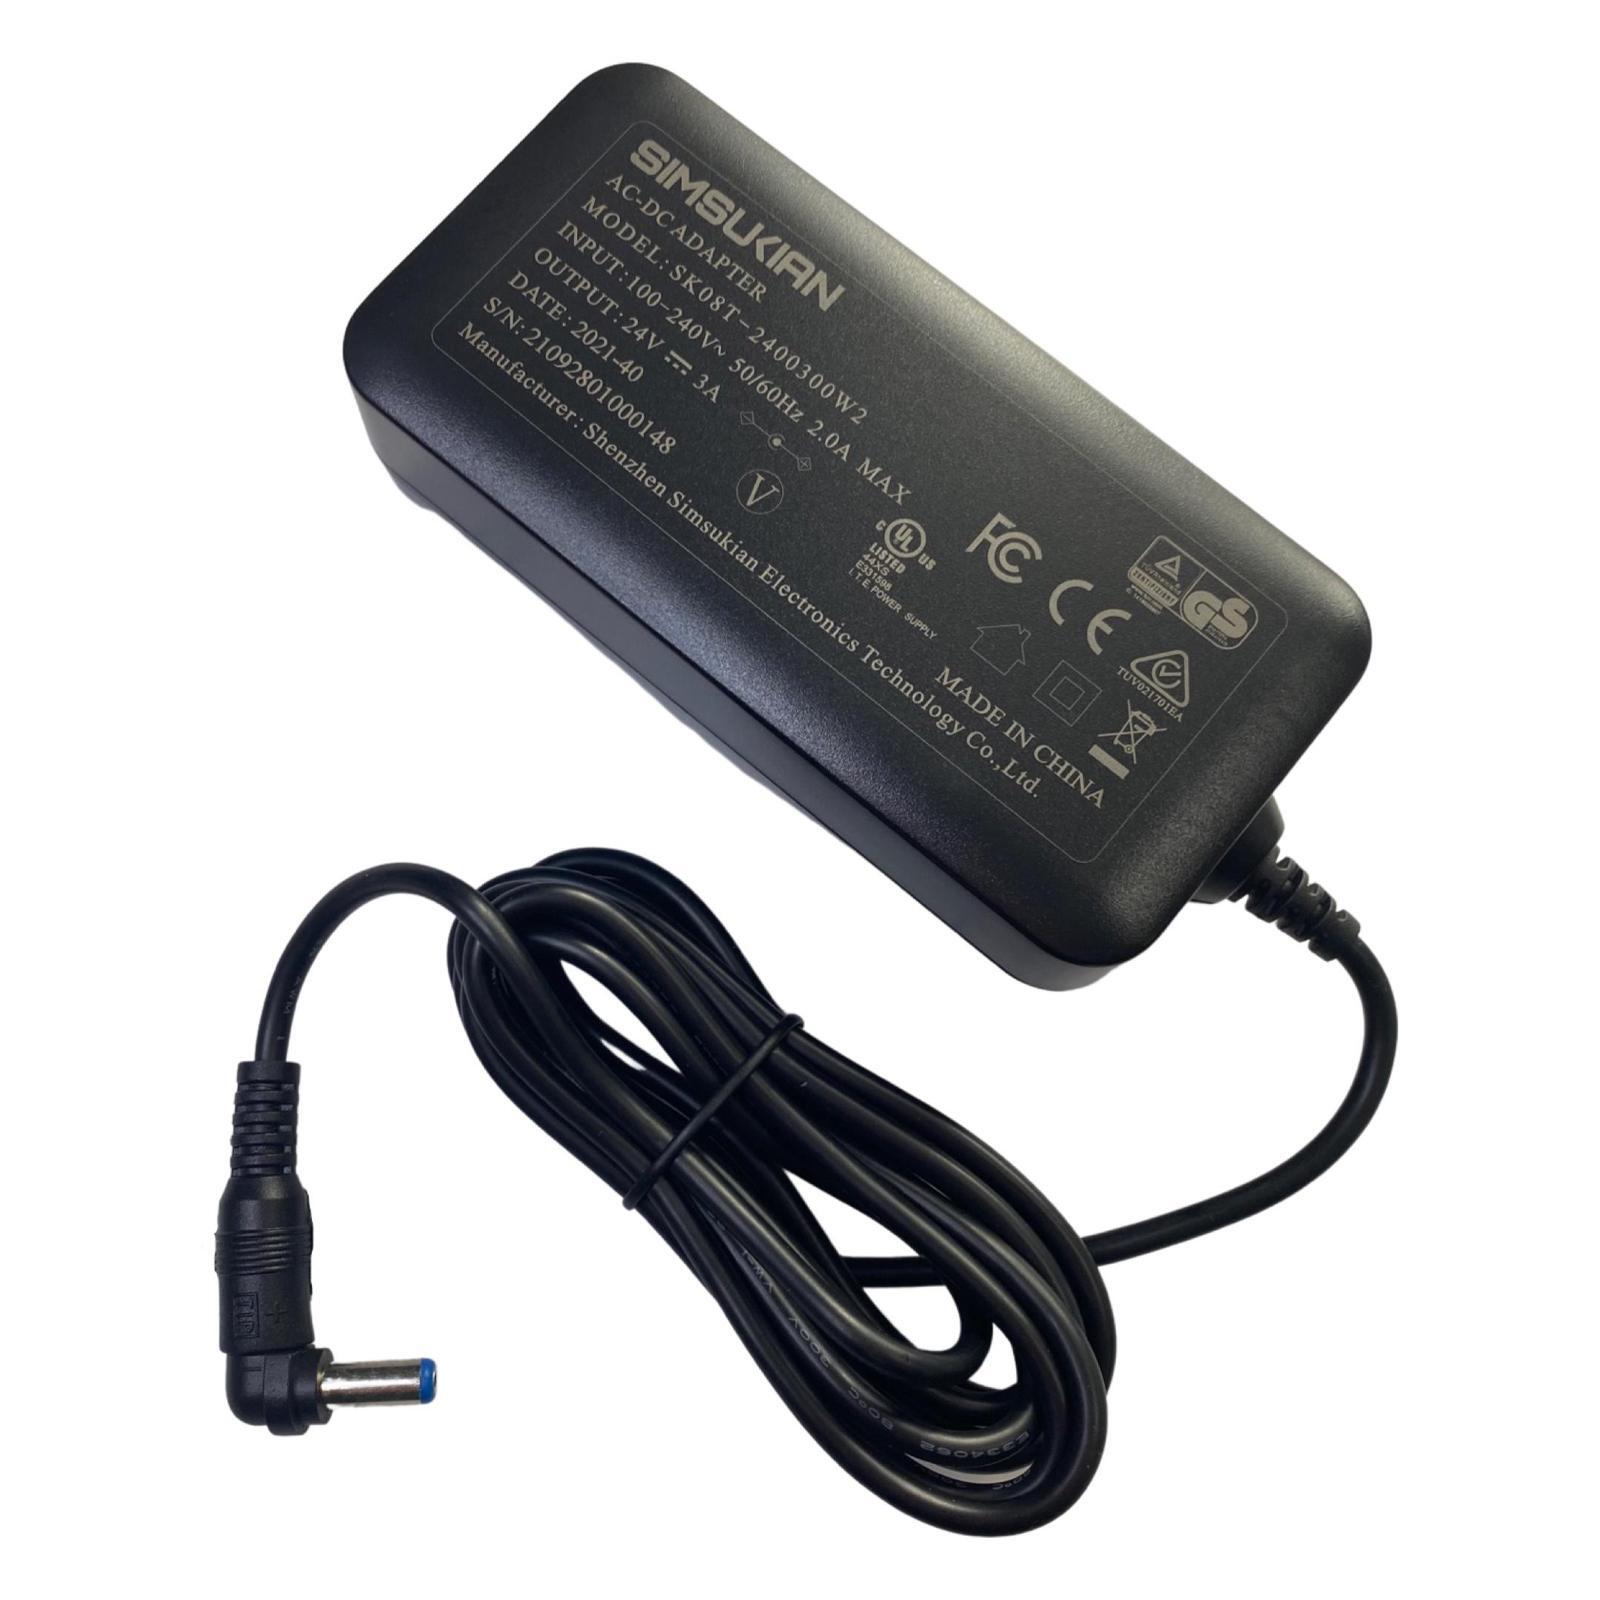 24V 3Amp Compact Power Adapter with 2.1 DC plug